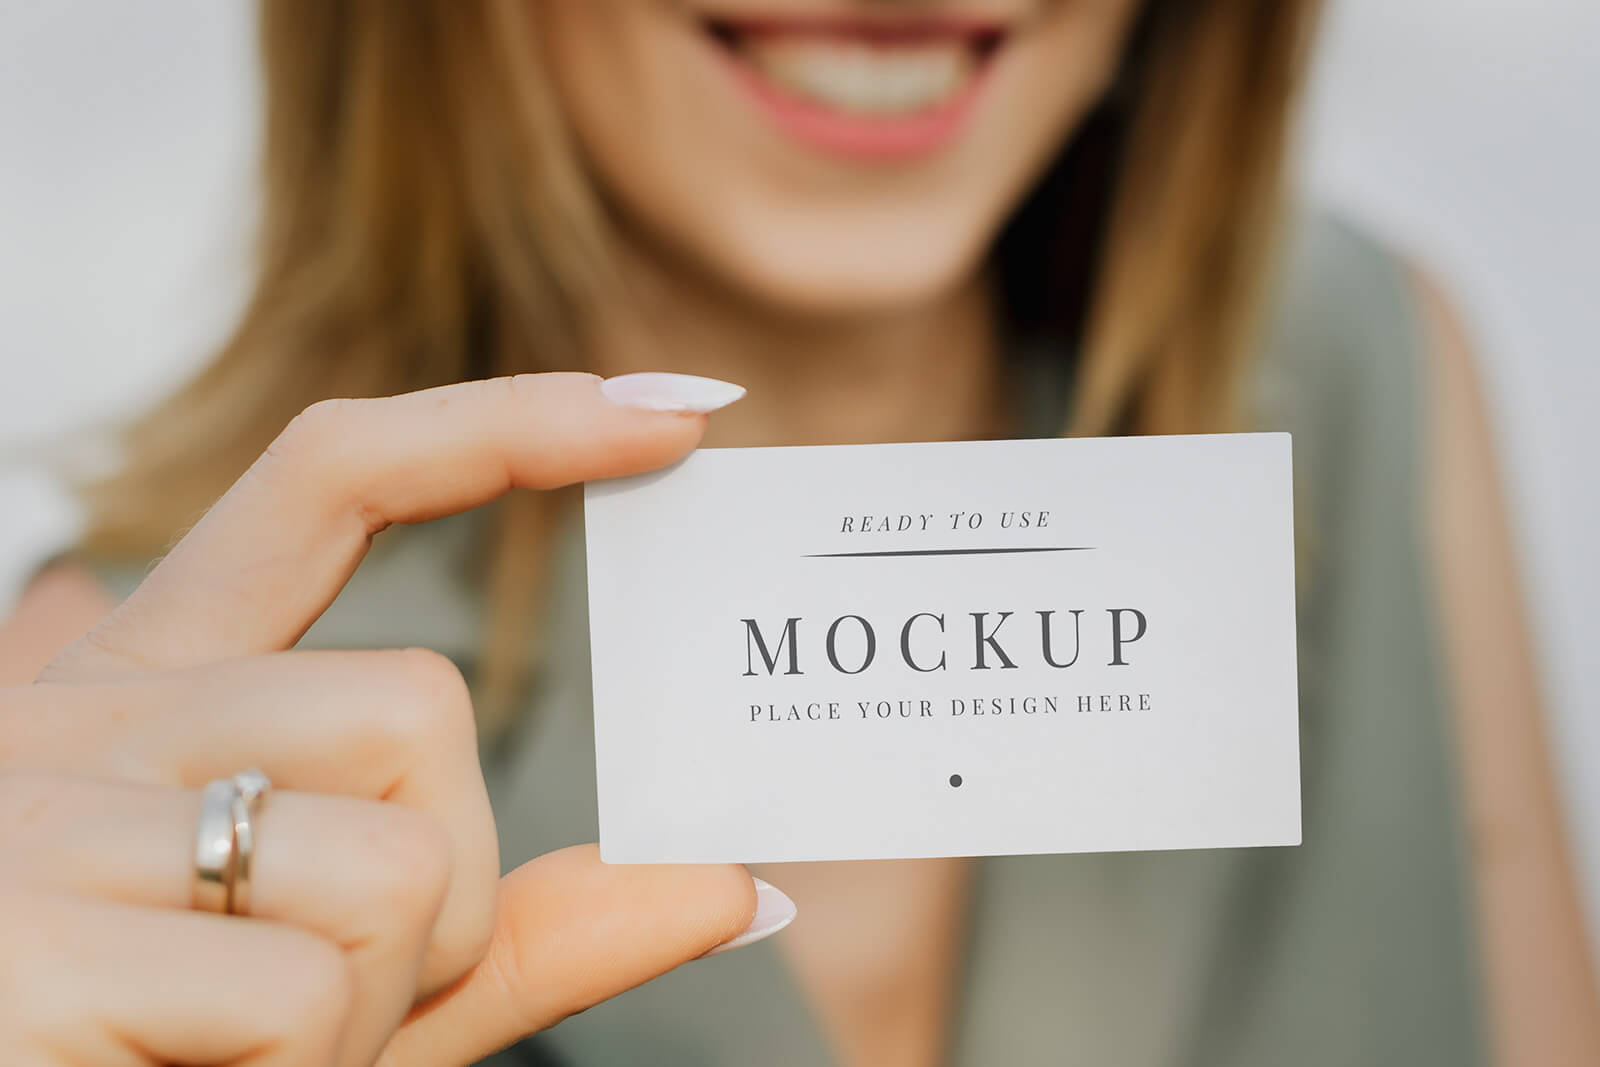 Free-Female-Hand-Holding-Business-Card-Mockup-PSD